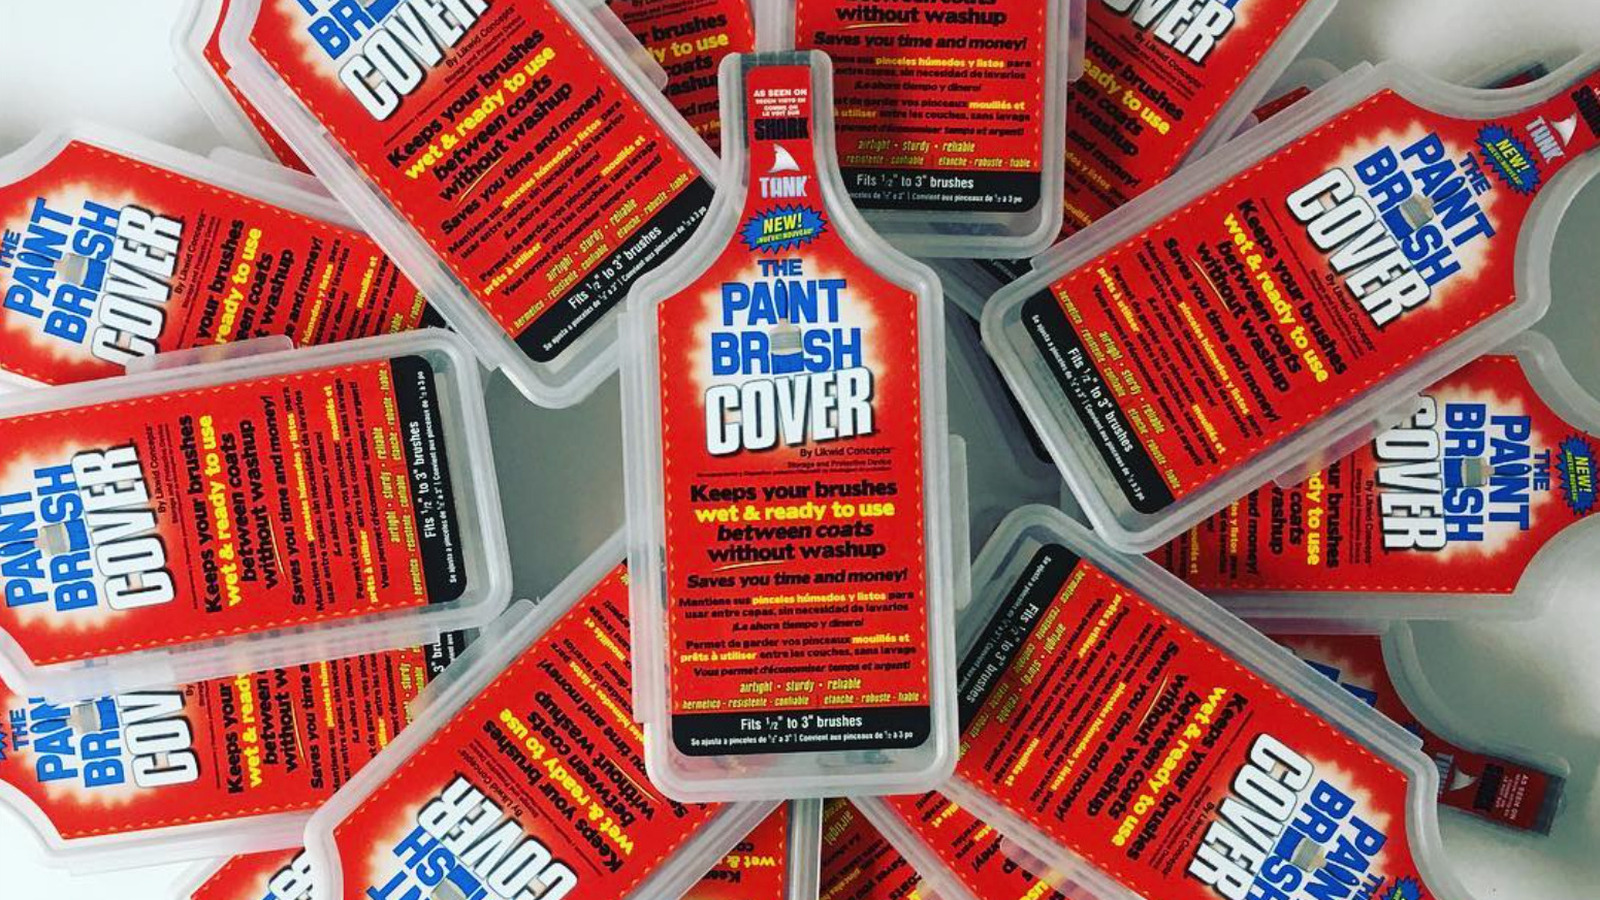 Long life paint brush cover - Painting and Decorating News